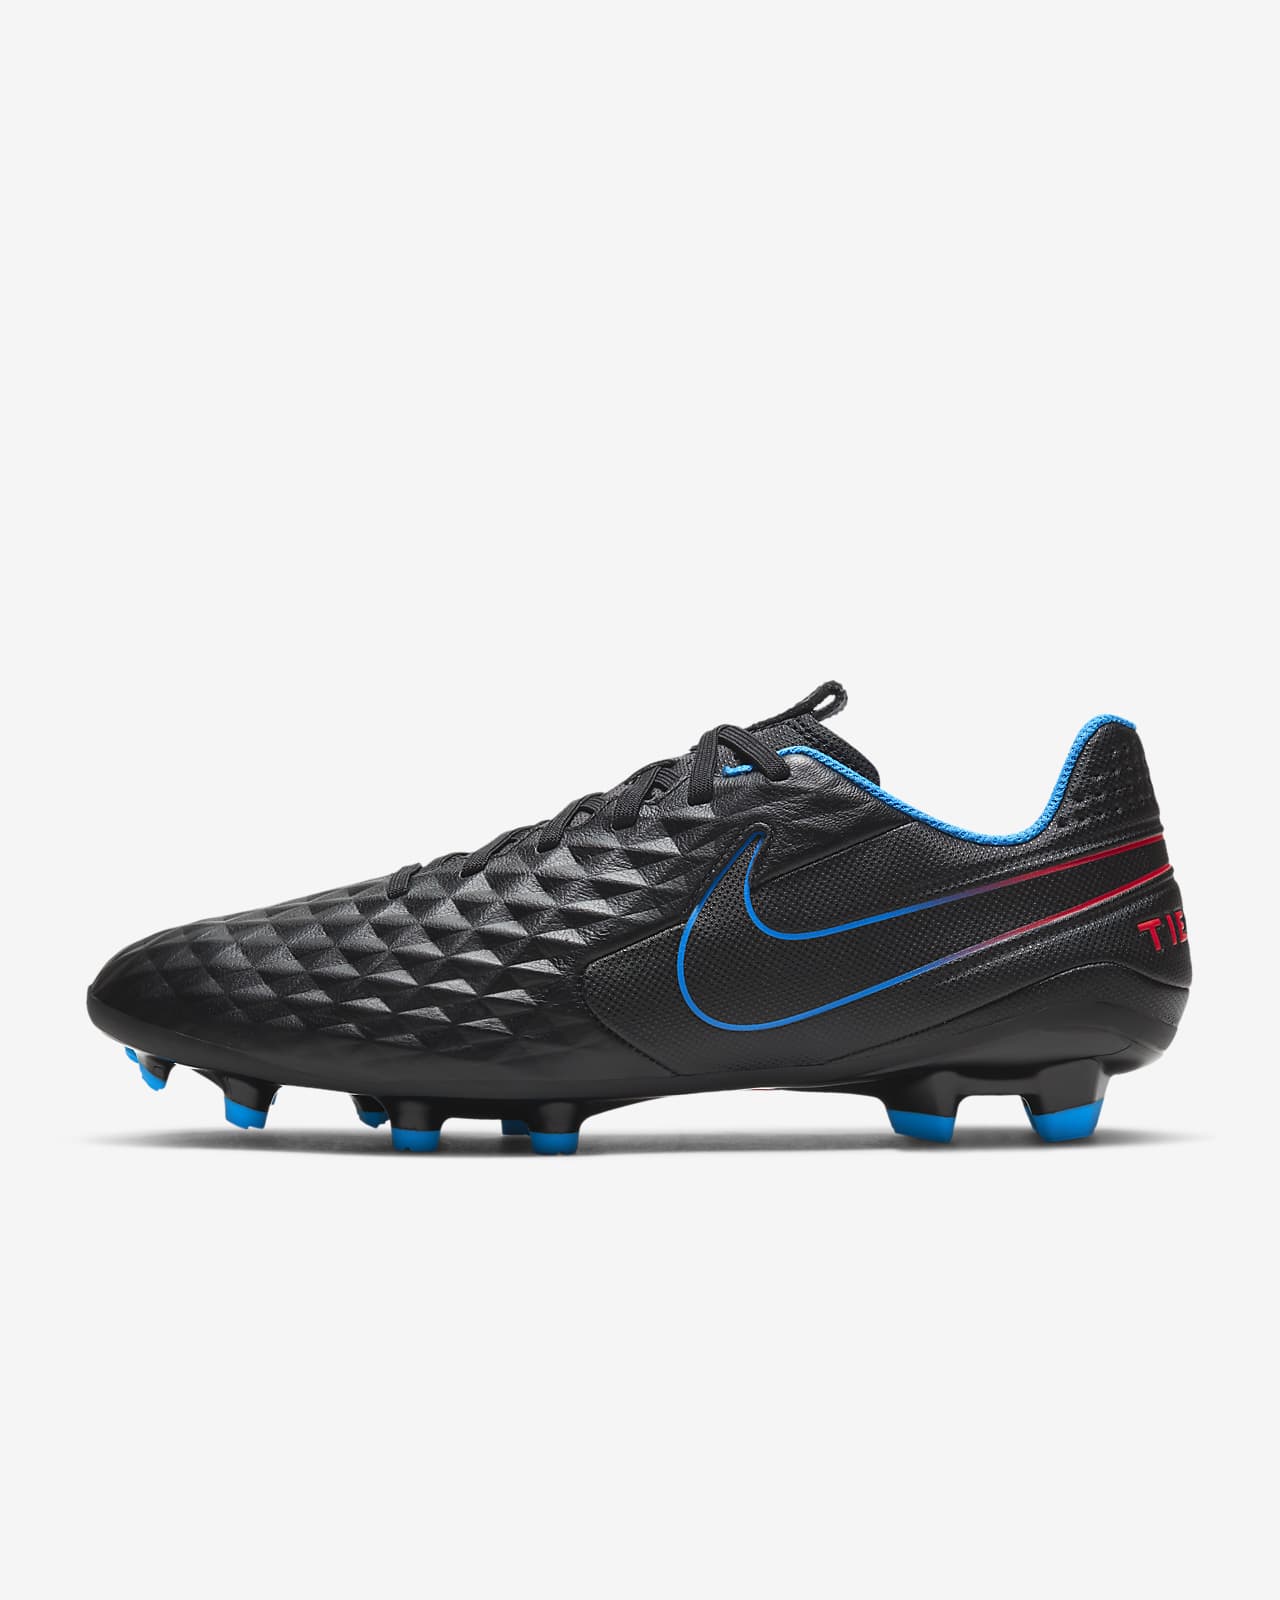 nike tiempo cleats youth